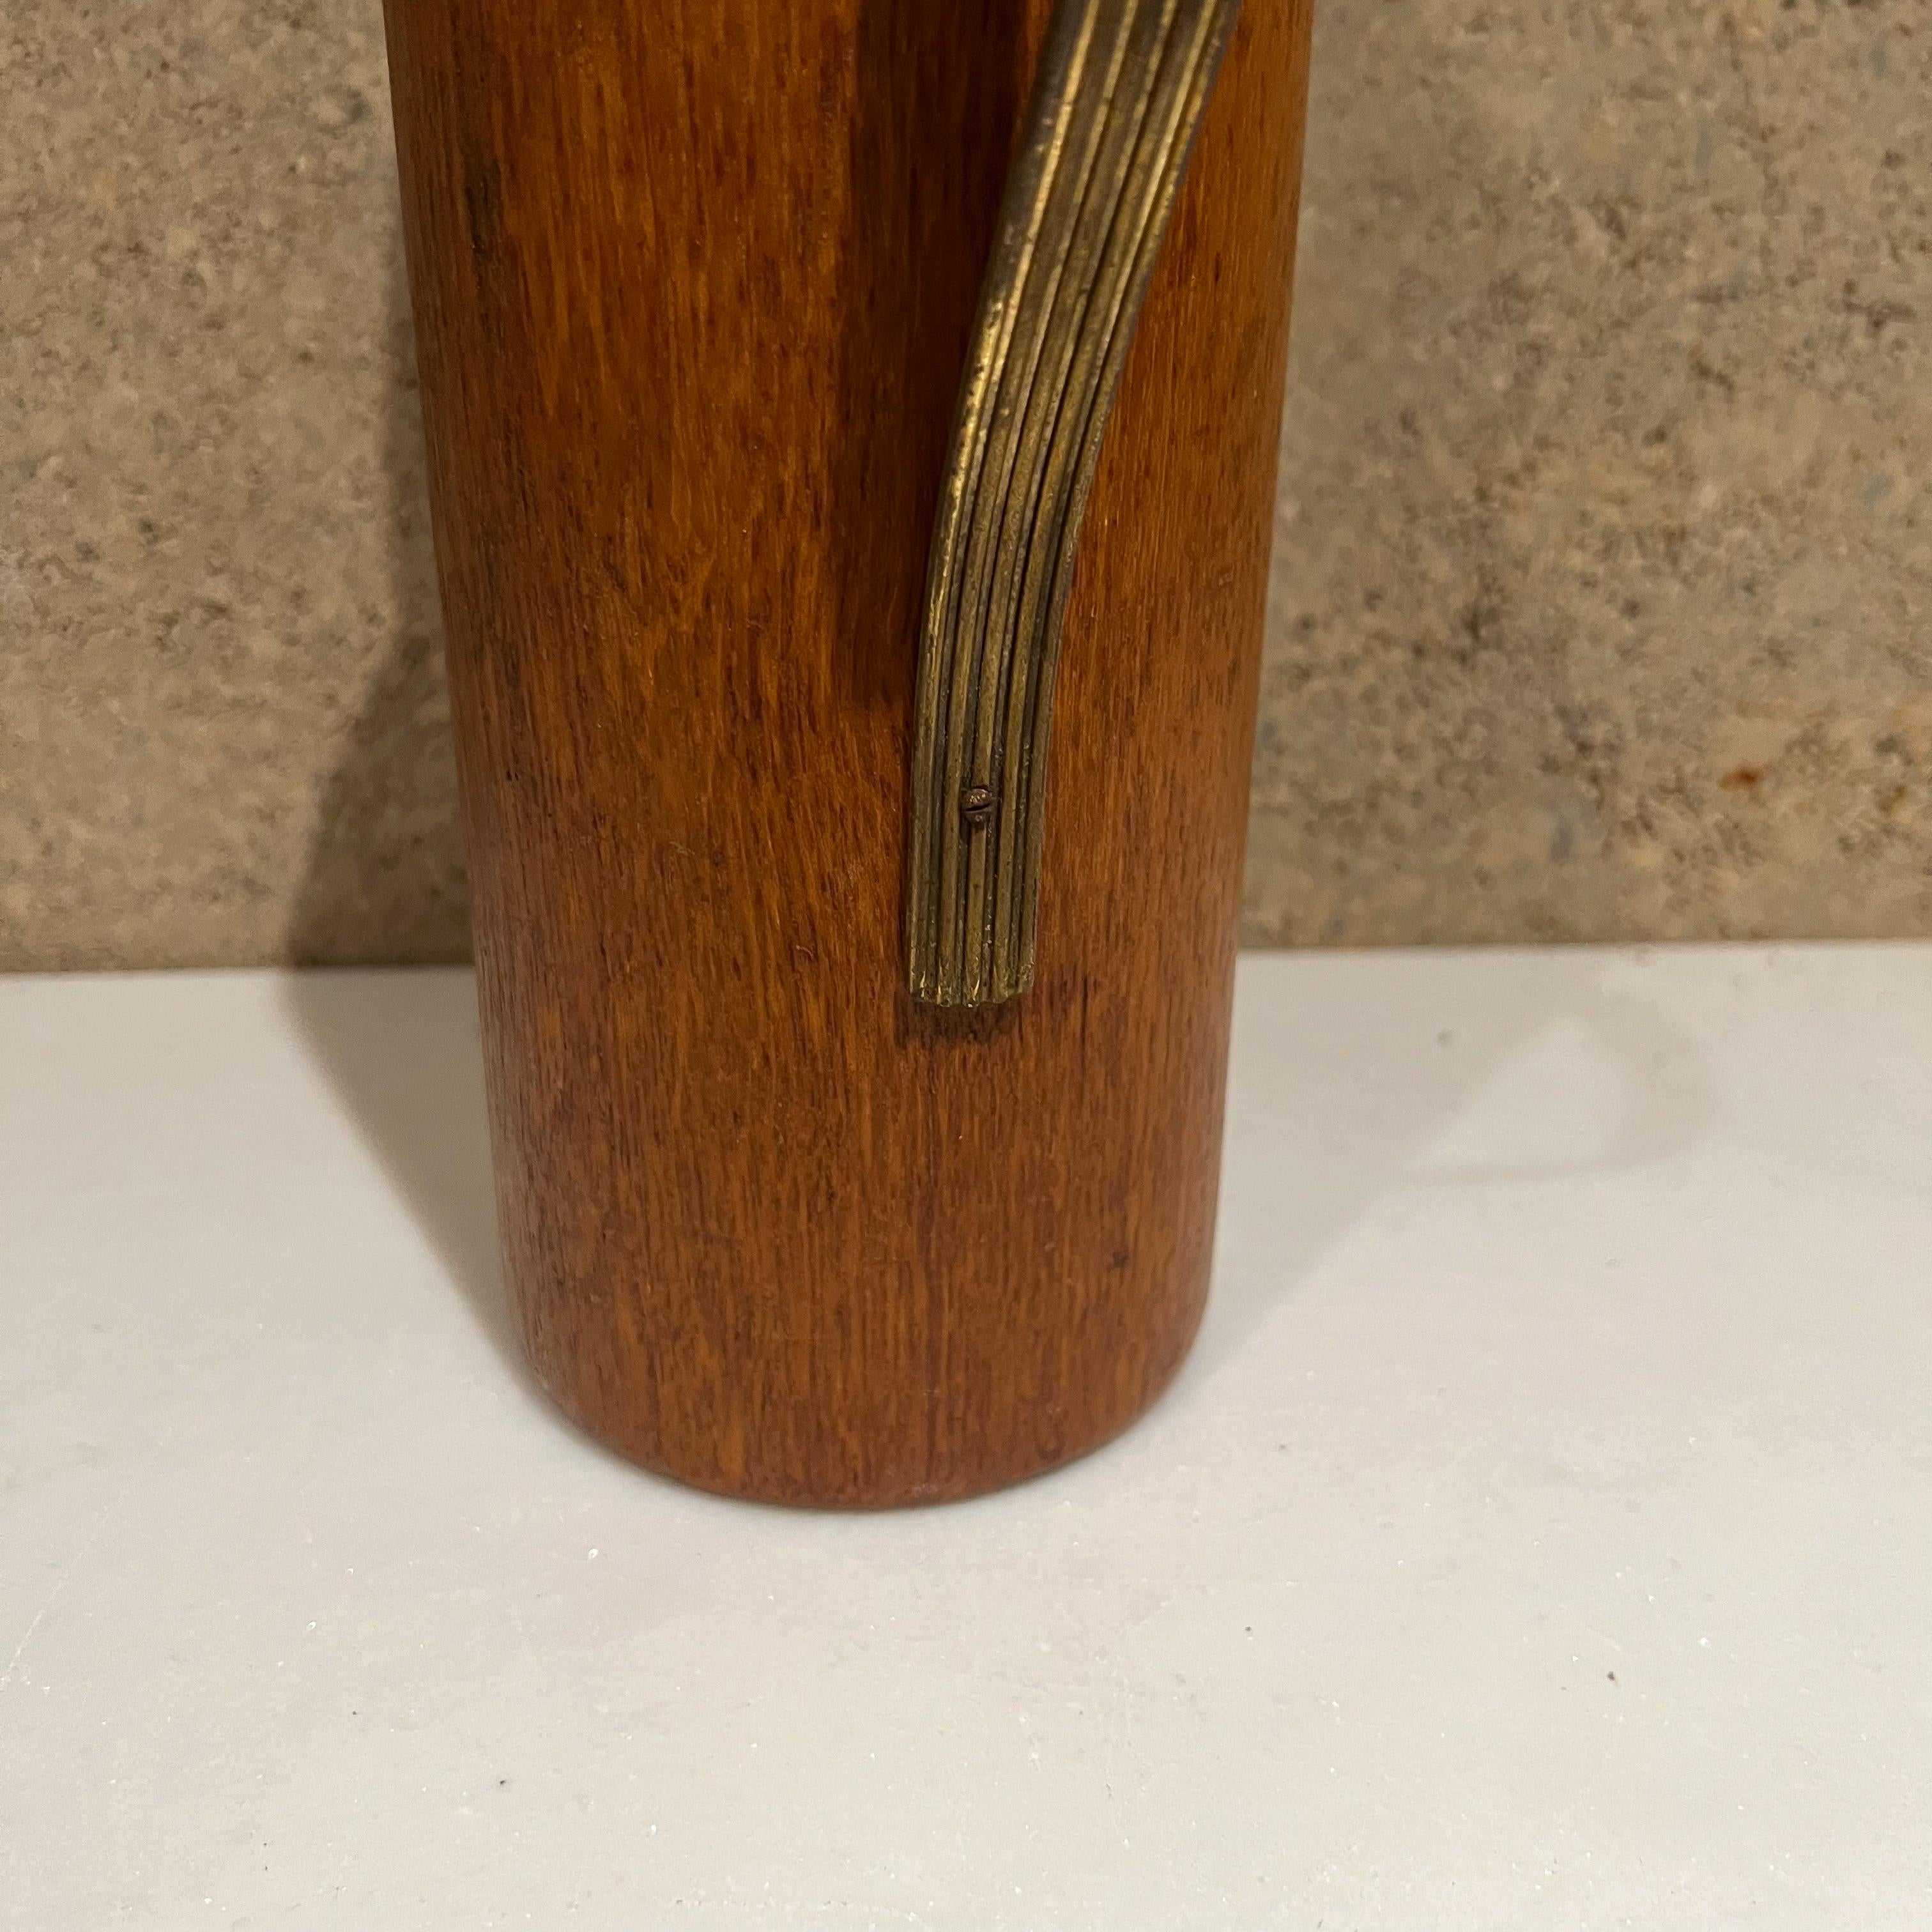 Aldo Tura Sculptural Carafe in Teakwood and Brass Italy, 1950s 1